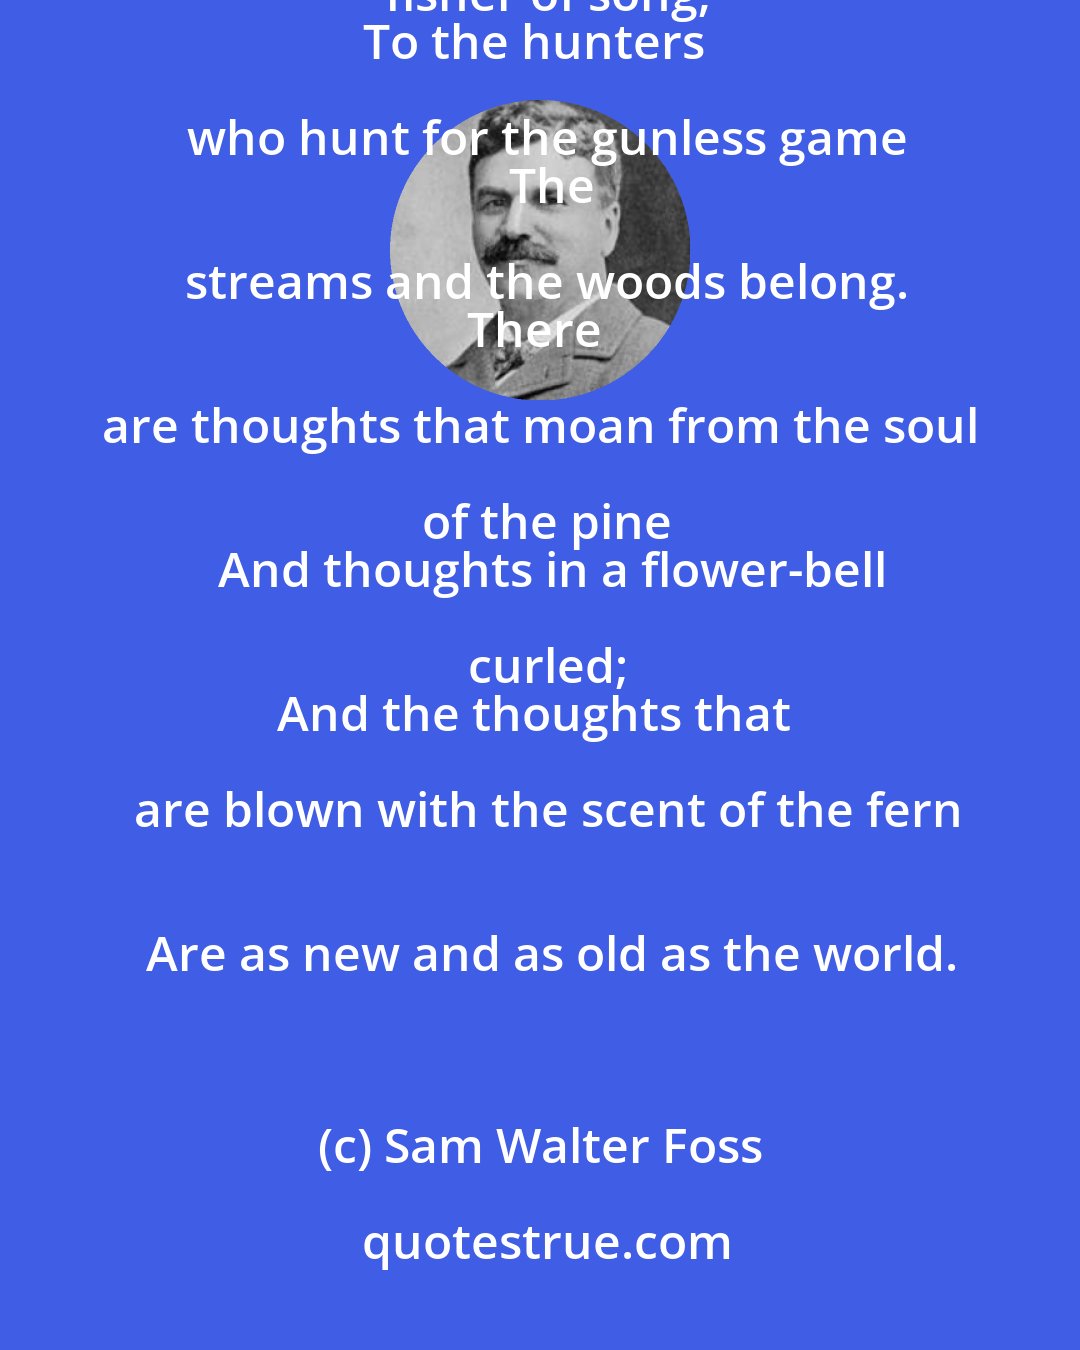 Sam Walter Foss: The woods were made for the hunters of dreams,
   The brooks for the fisher of song;
To the hunters who hunt for the gunless game
   The streams and the woods belong.
There are thoughts that moan from the soul of the pine
   And thoughts in a flower-bell curled;
And the thoughts that are blown with the scent of the fern
   Are as new and as old as the world.